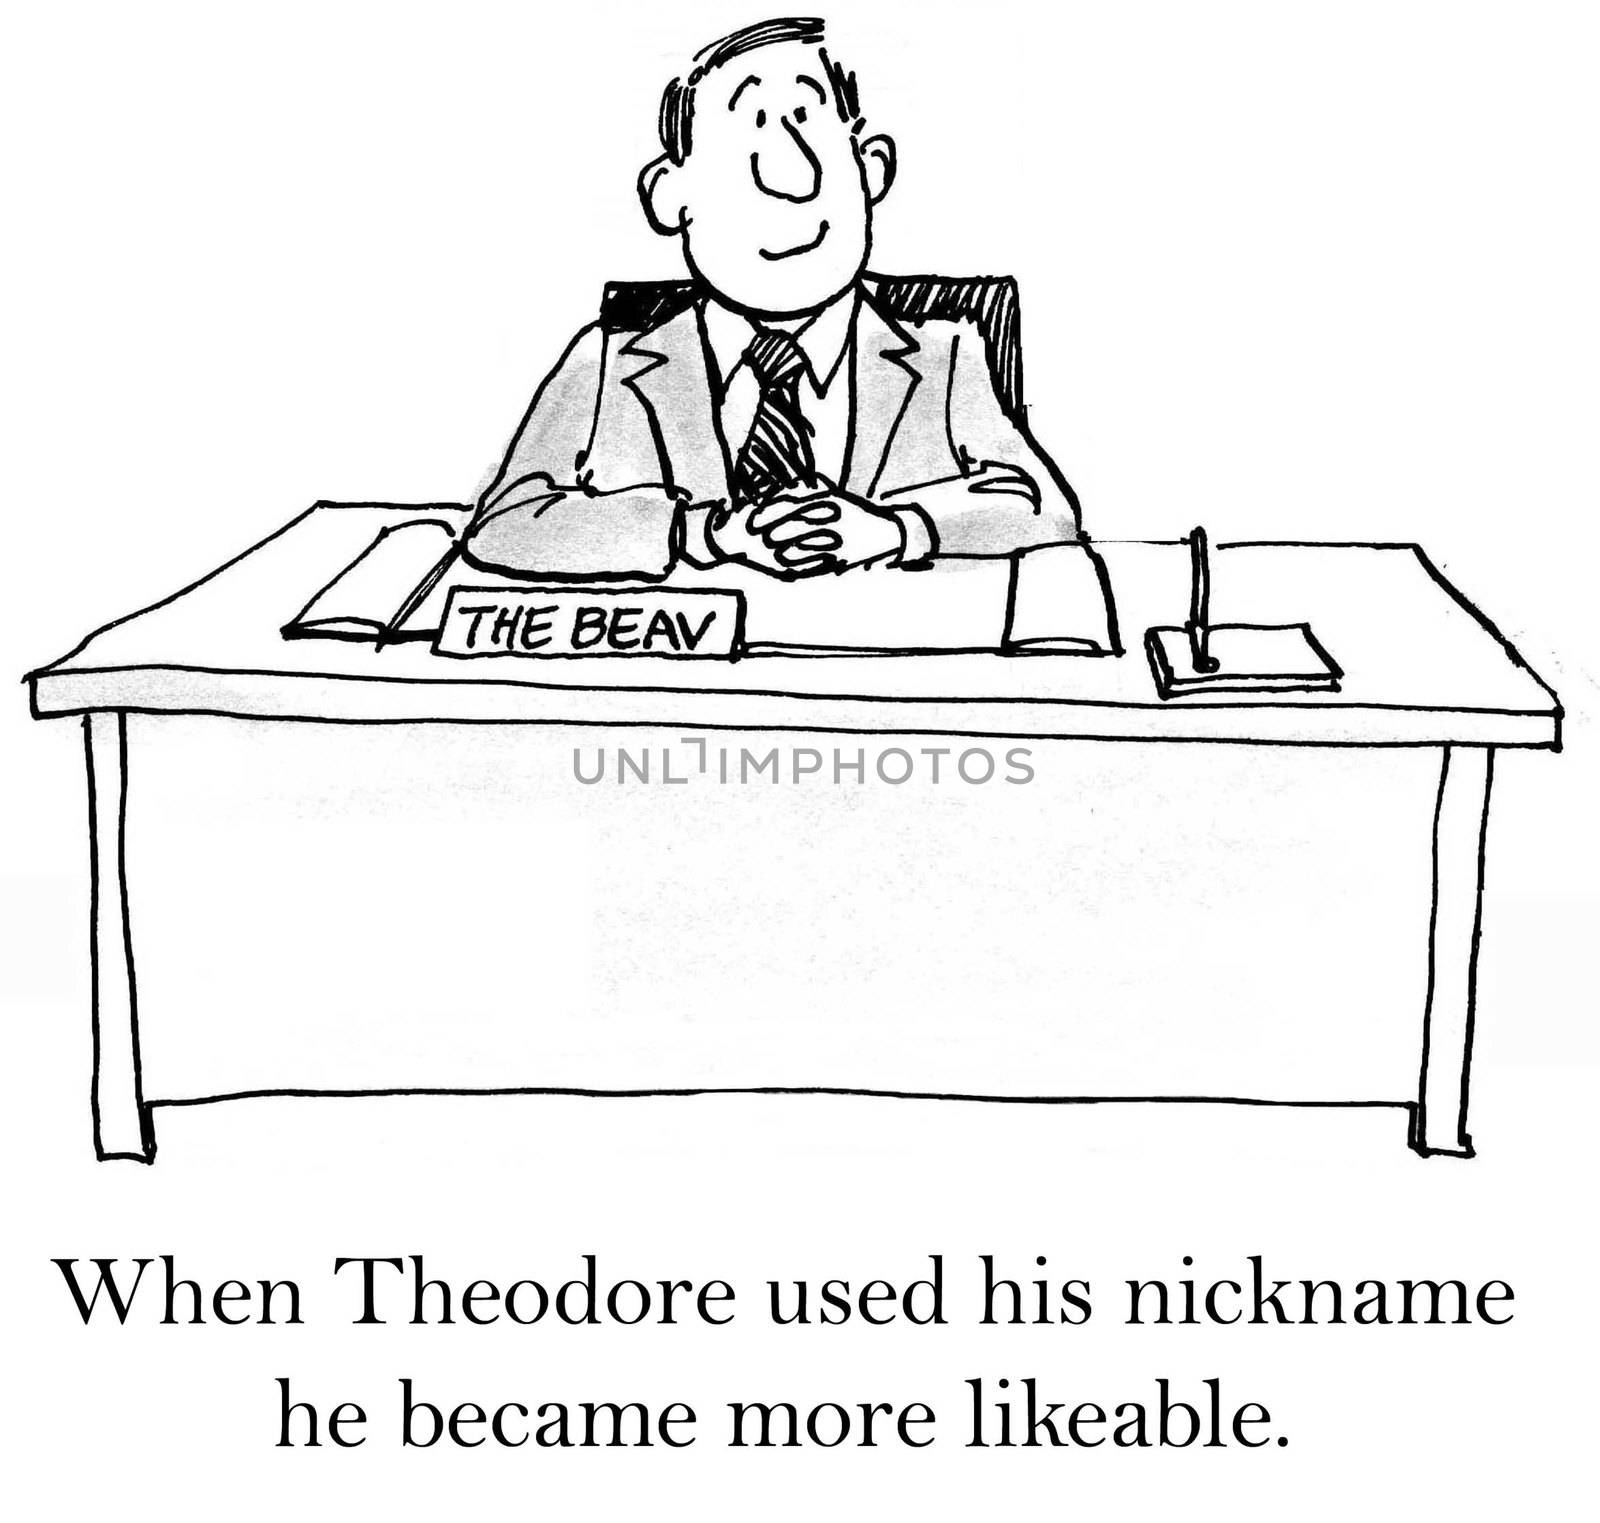 When Theodore used his nickname he became more likeable.